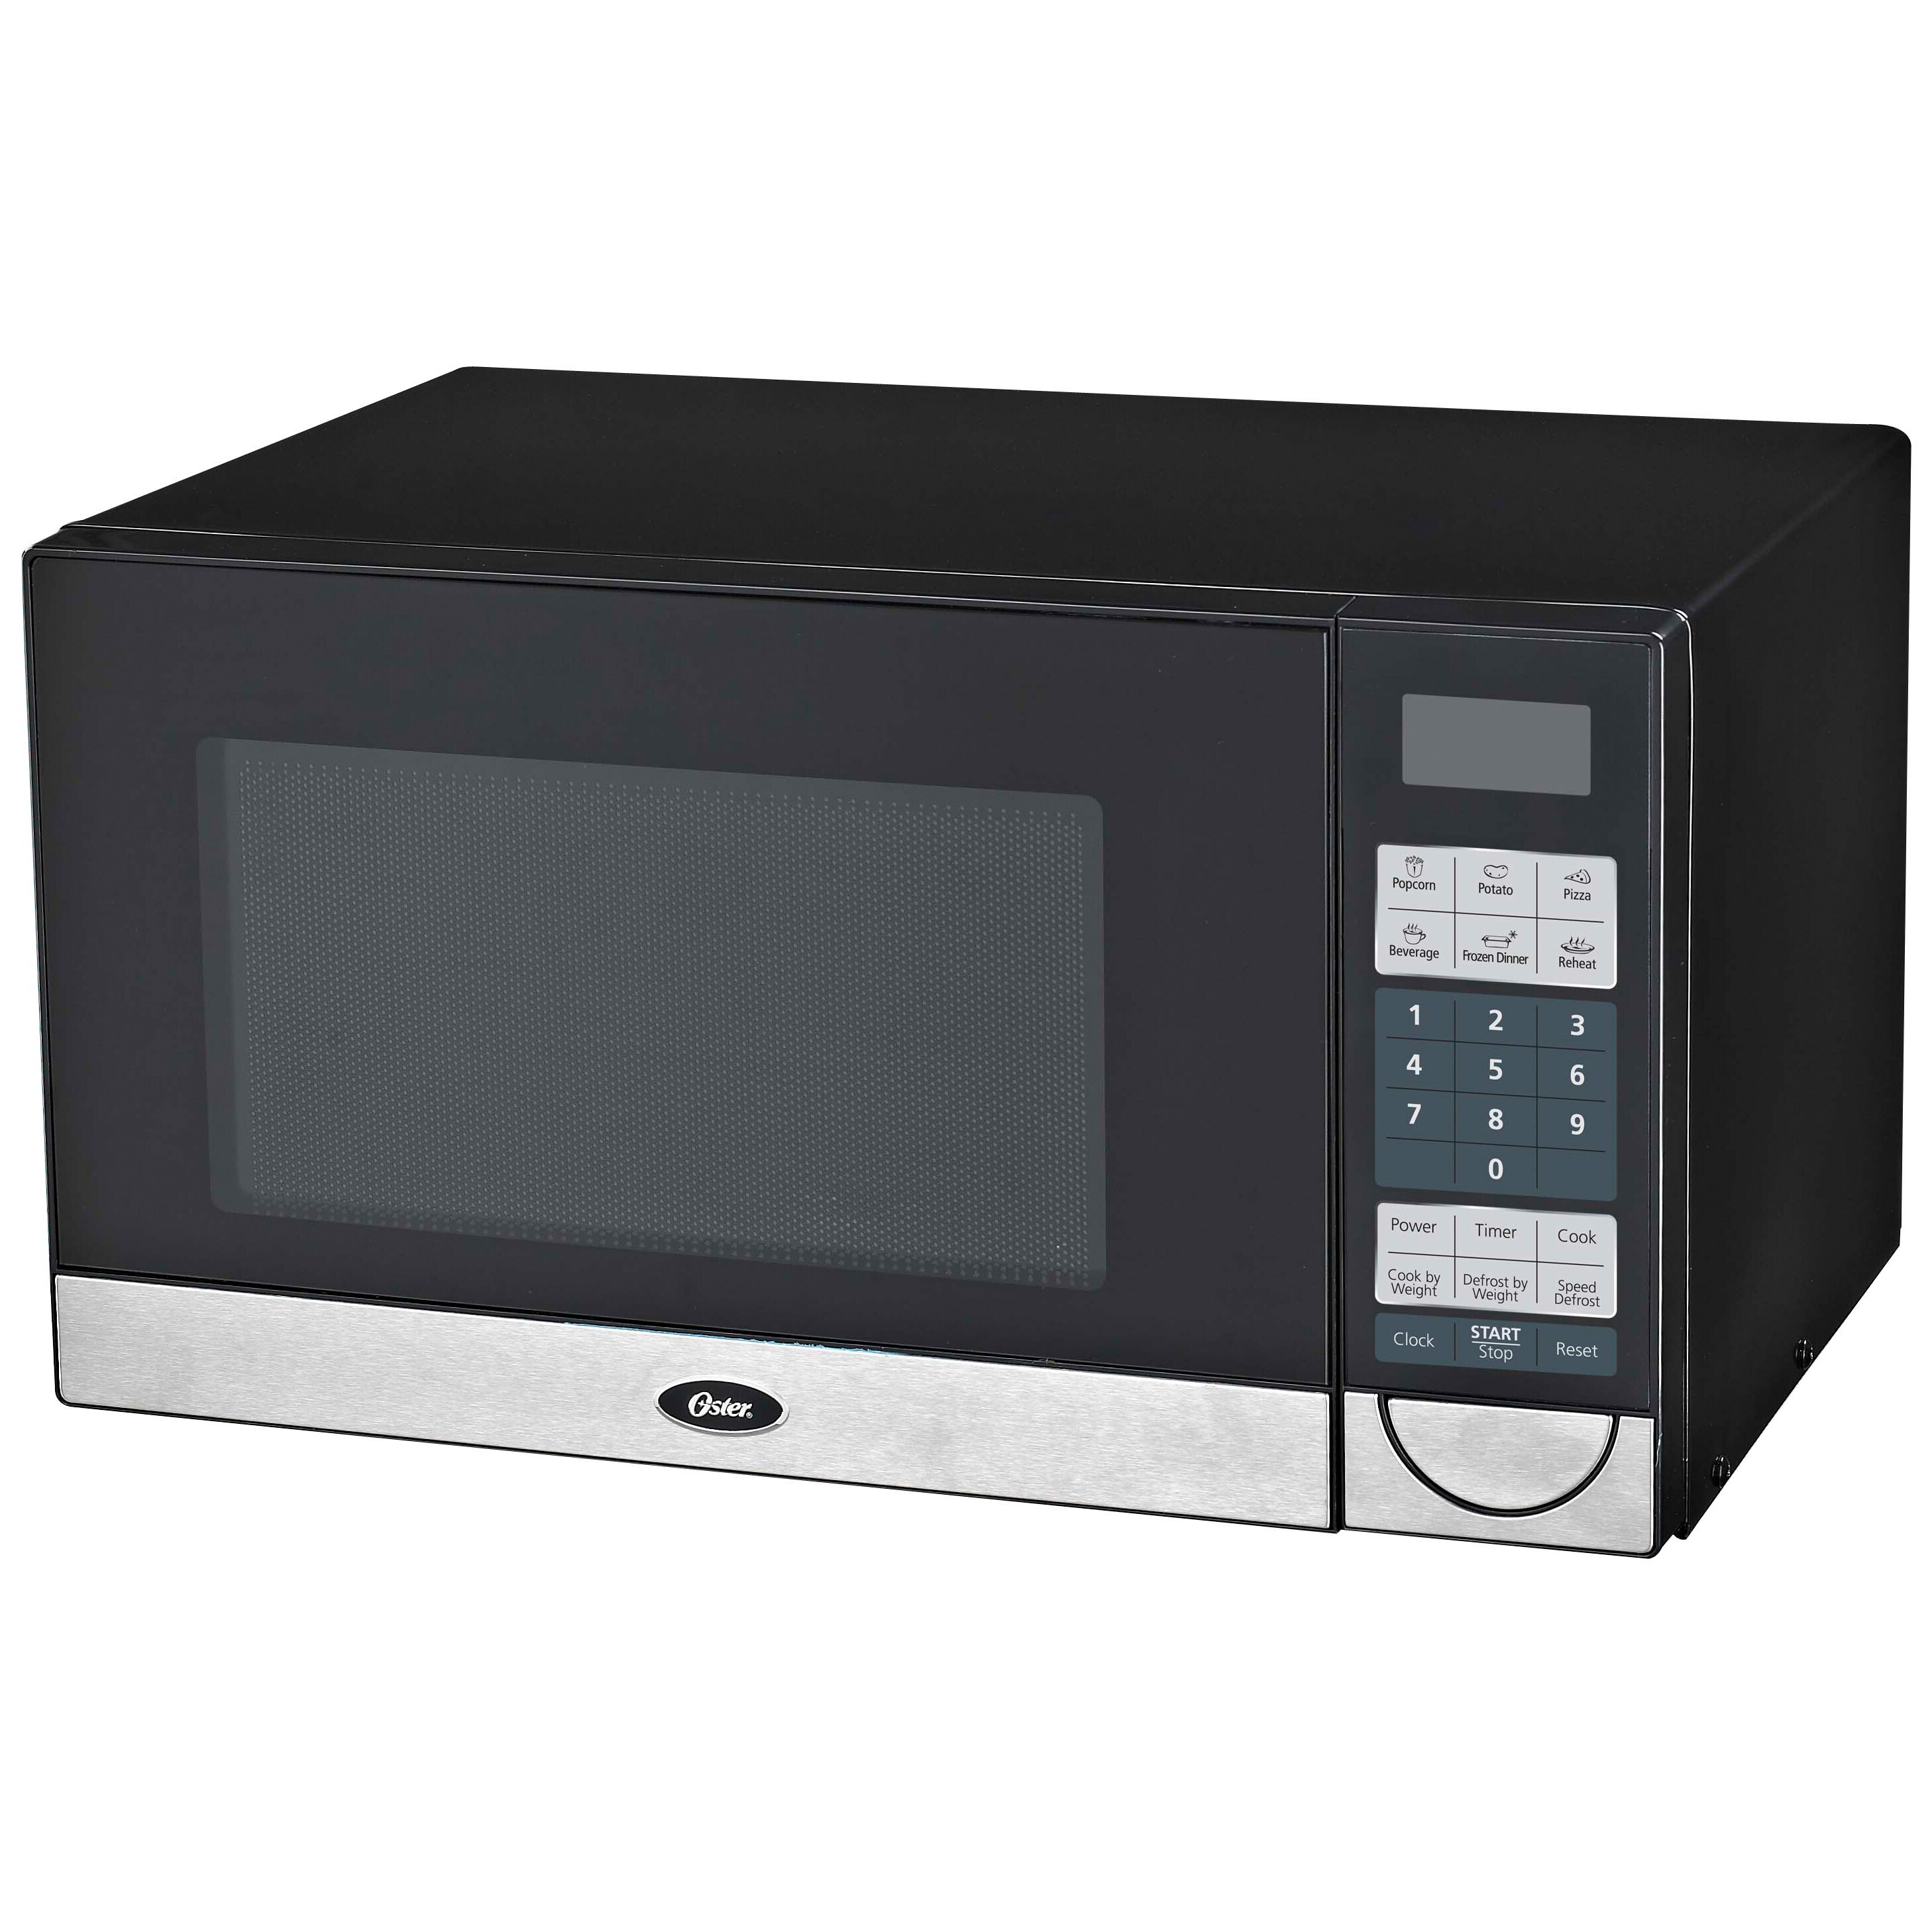 Shop Oster Ogb5902 Black Stainless Steel Microwave Oven